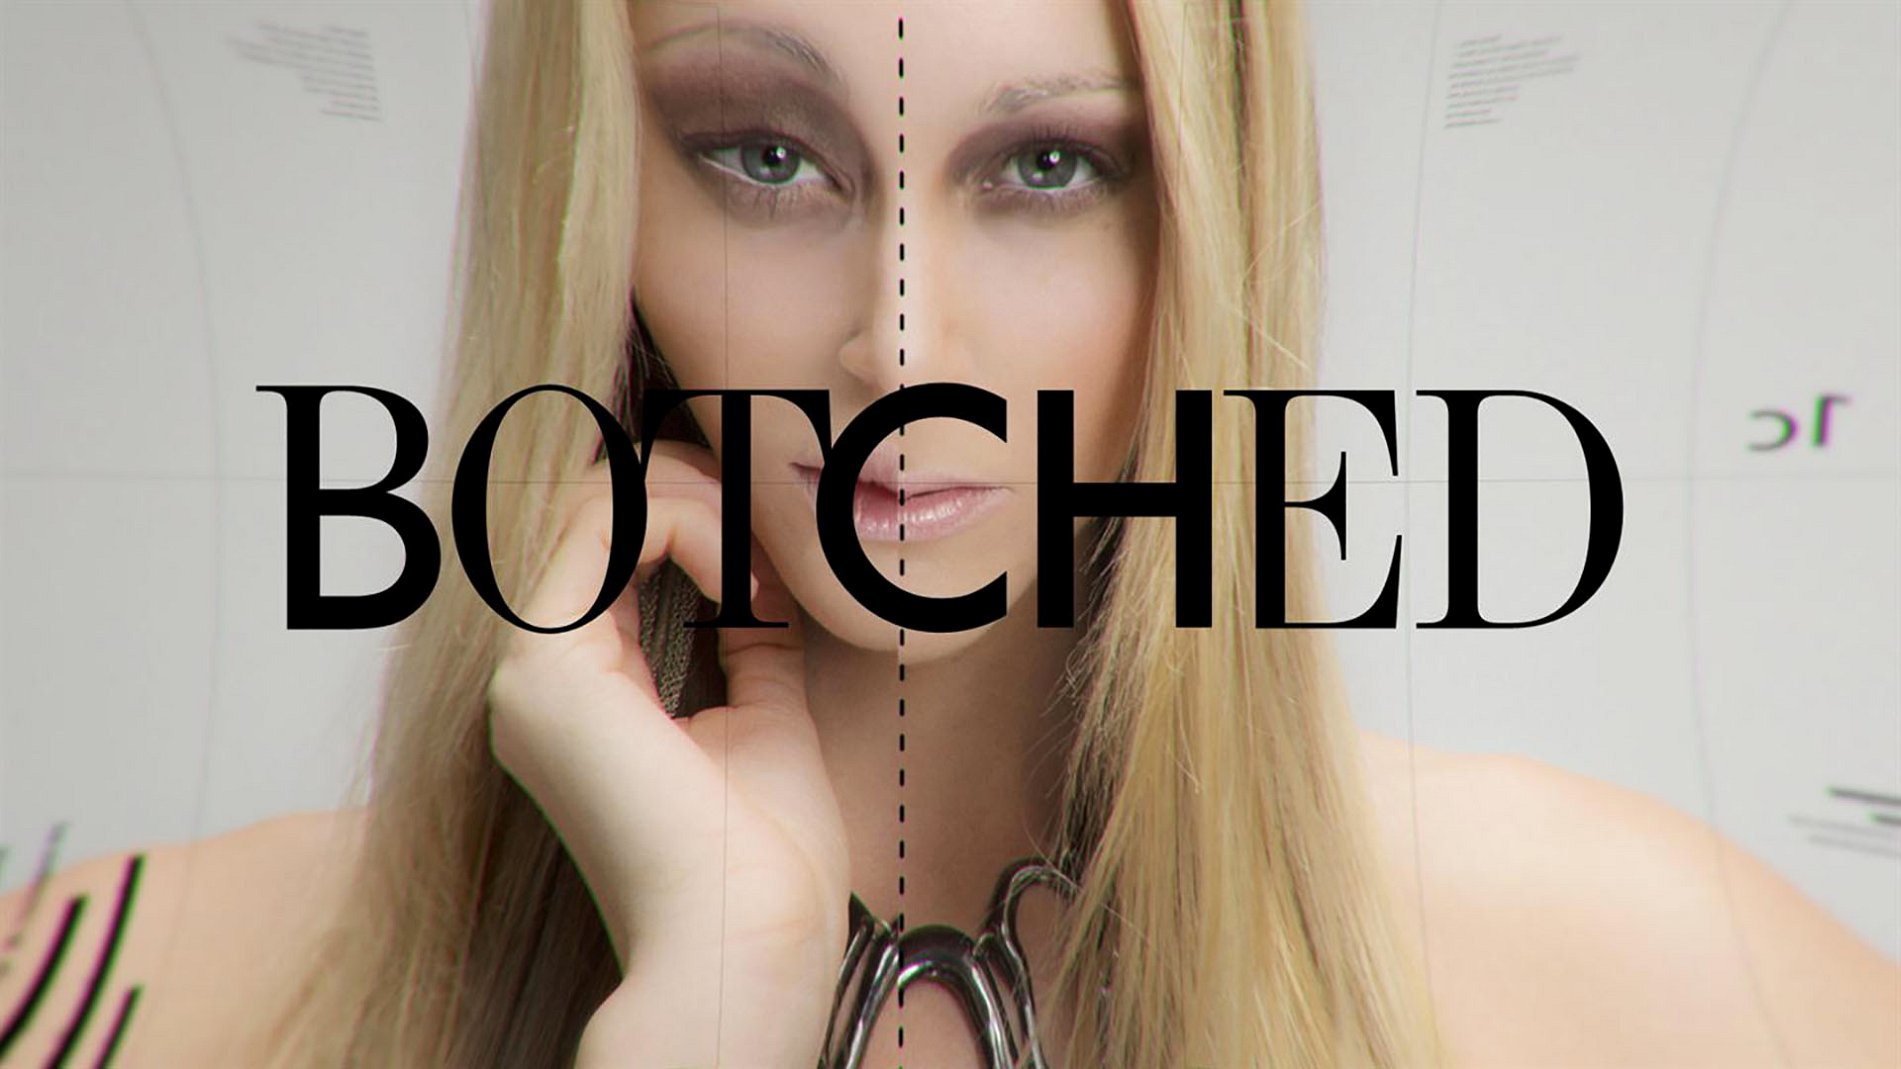 What Time Does 'Botched' Come On Tonight?